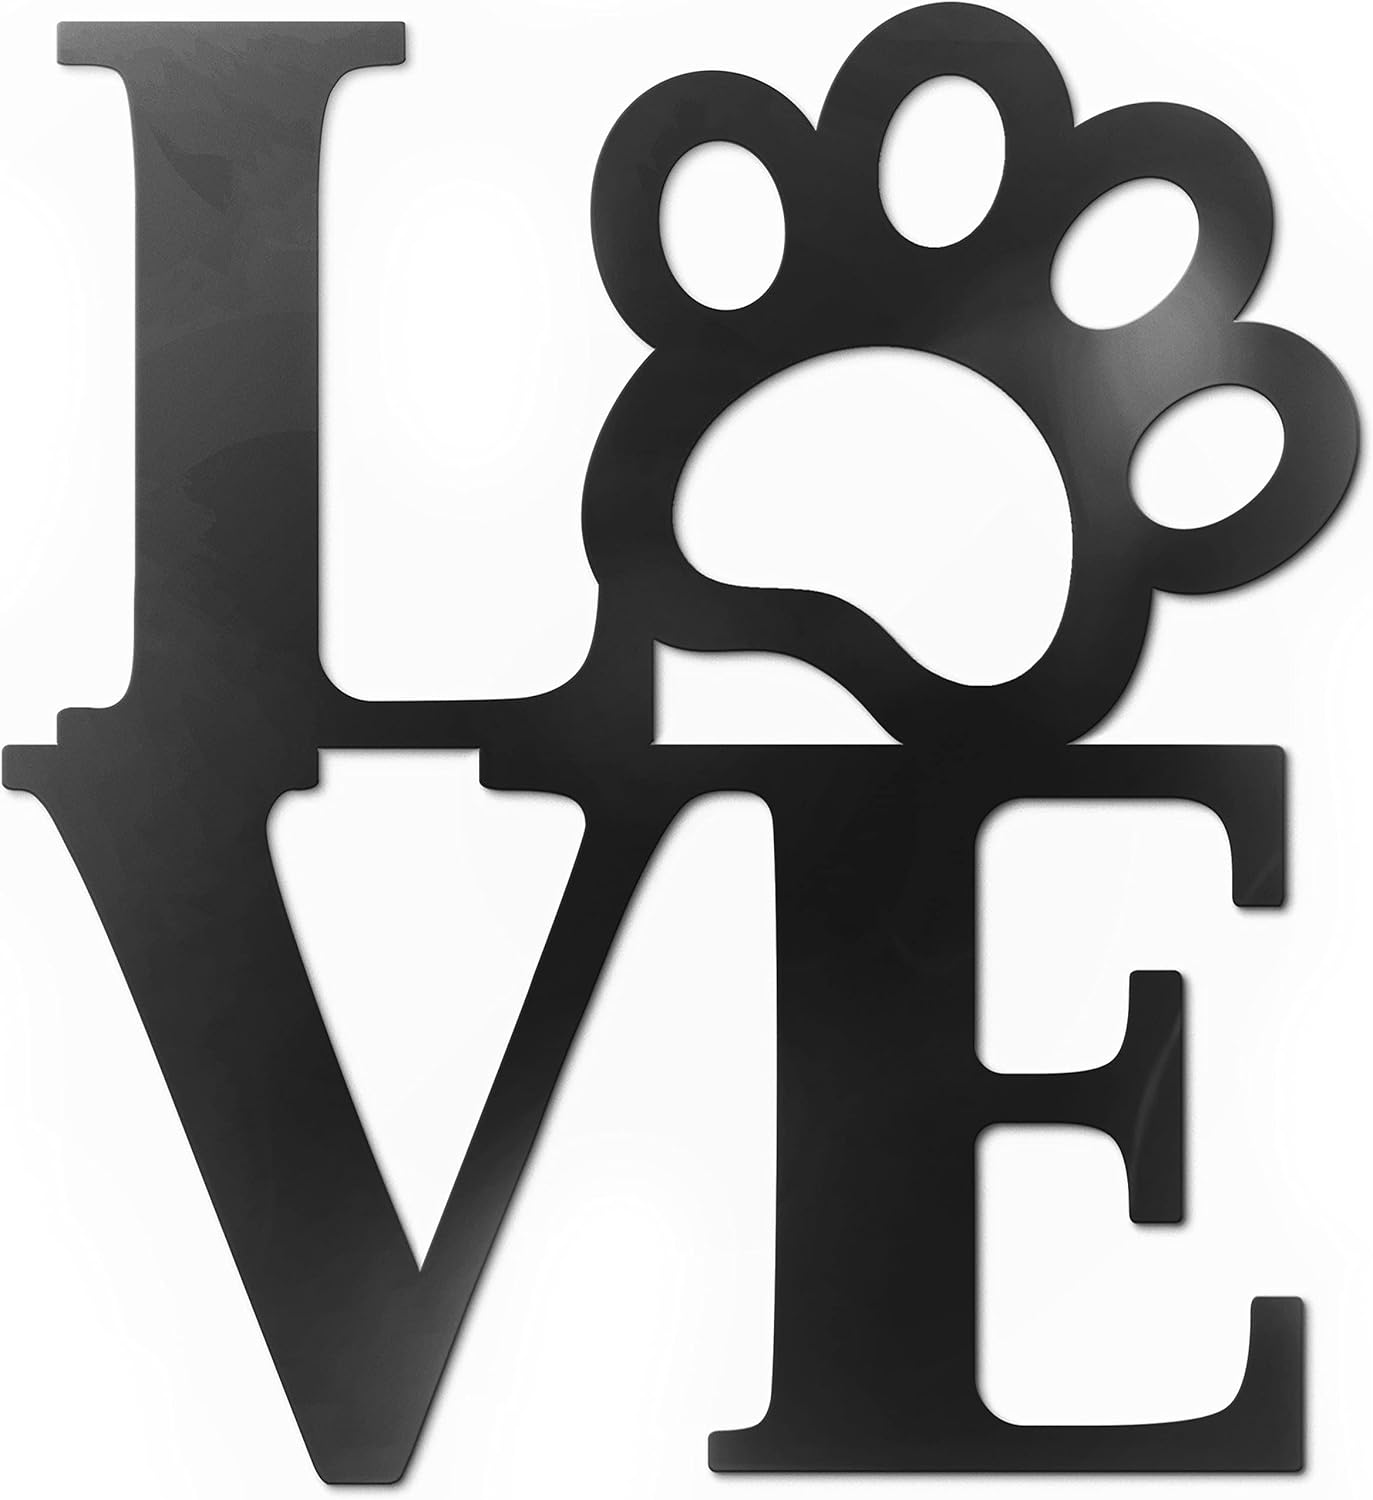 Vivegate Love with Paw Print Wall Decor Black Metal Art – 12.5”X11.5” Dog Room Accessories Decor for Dog Lovers Metal Wall Decor Love Animals Art